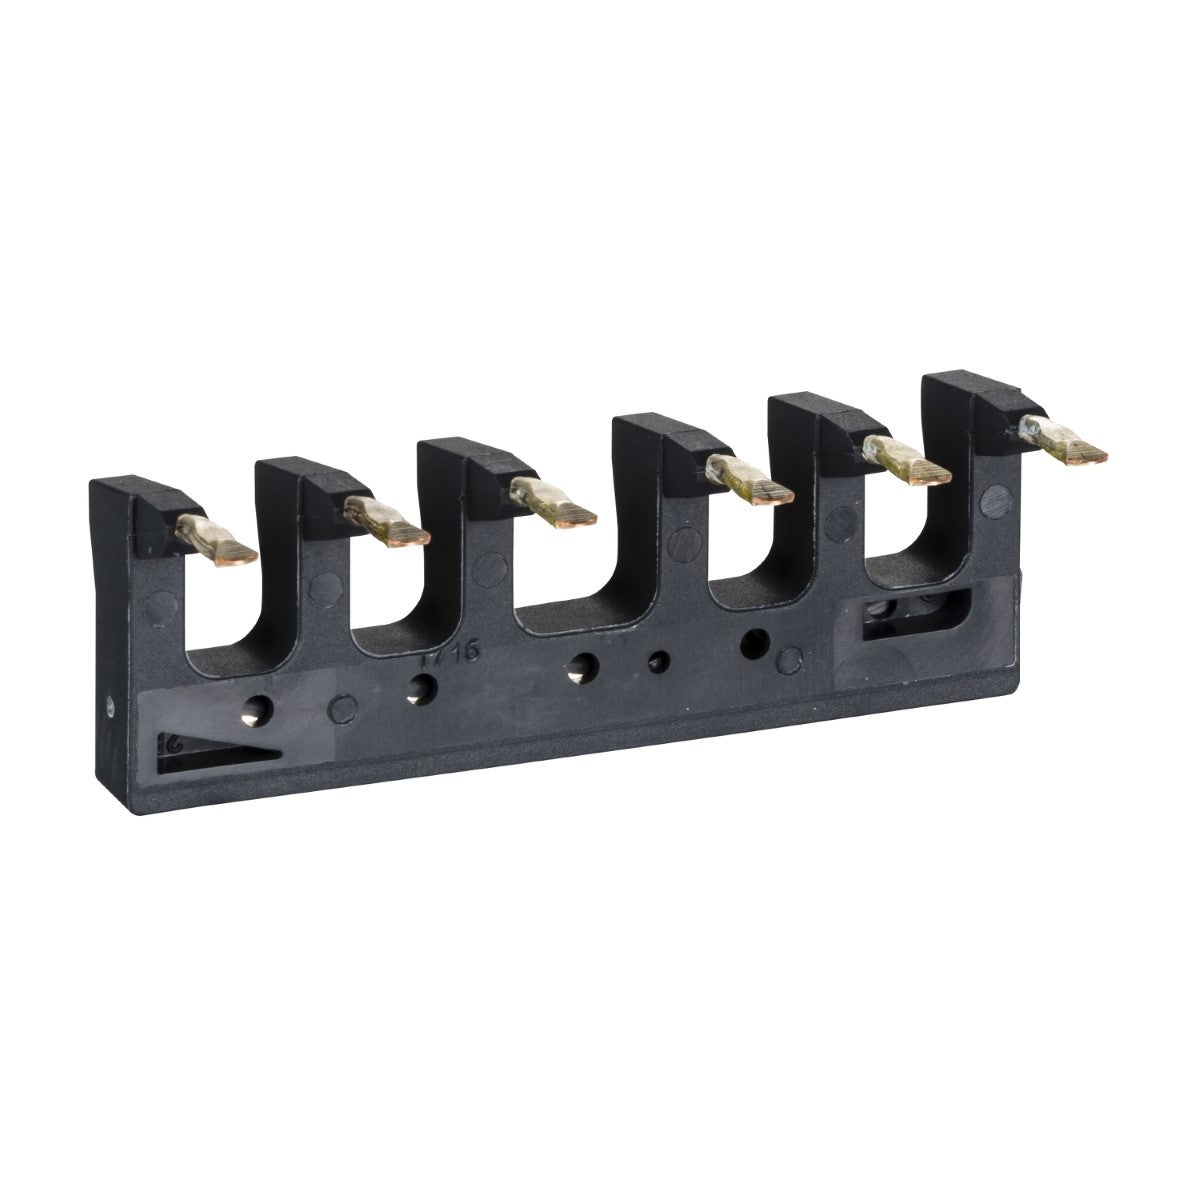 Set of power connections, parallel busbar, for 3P reversing contactors assembly, LC1D09-D38 spring terminals